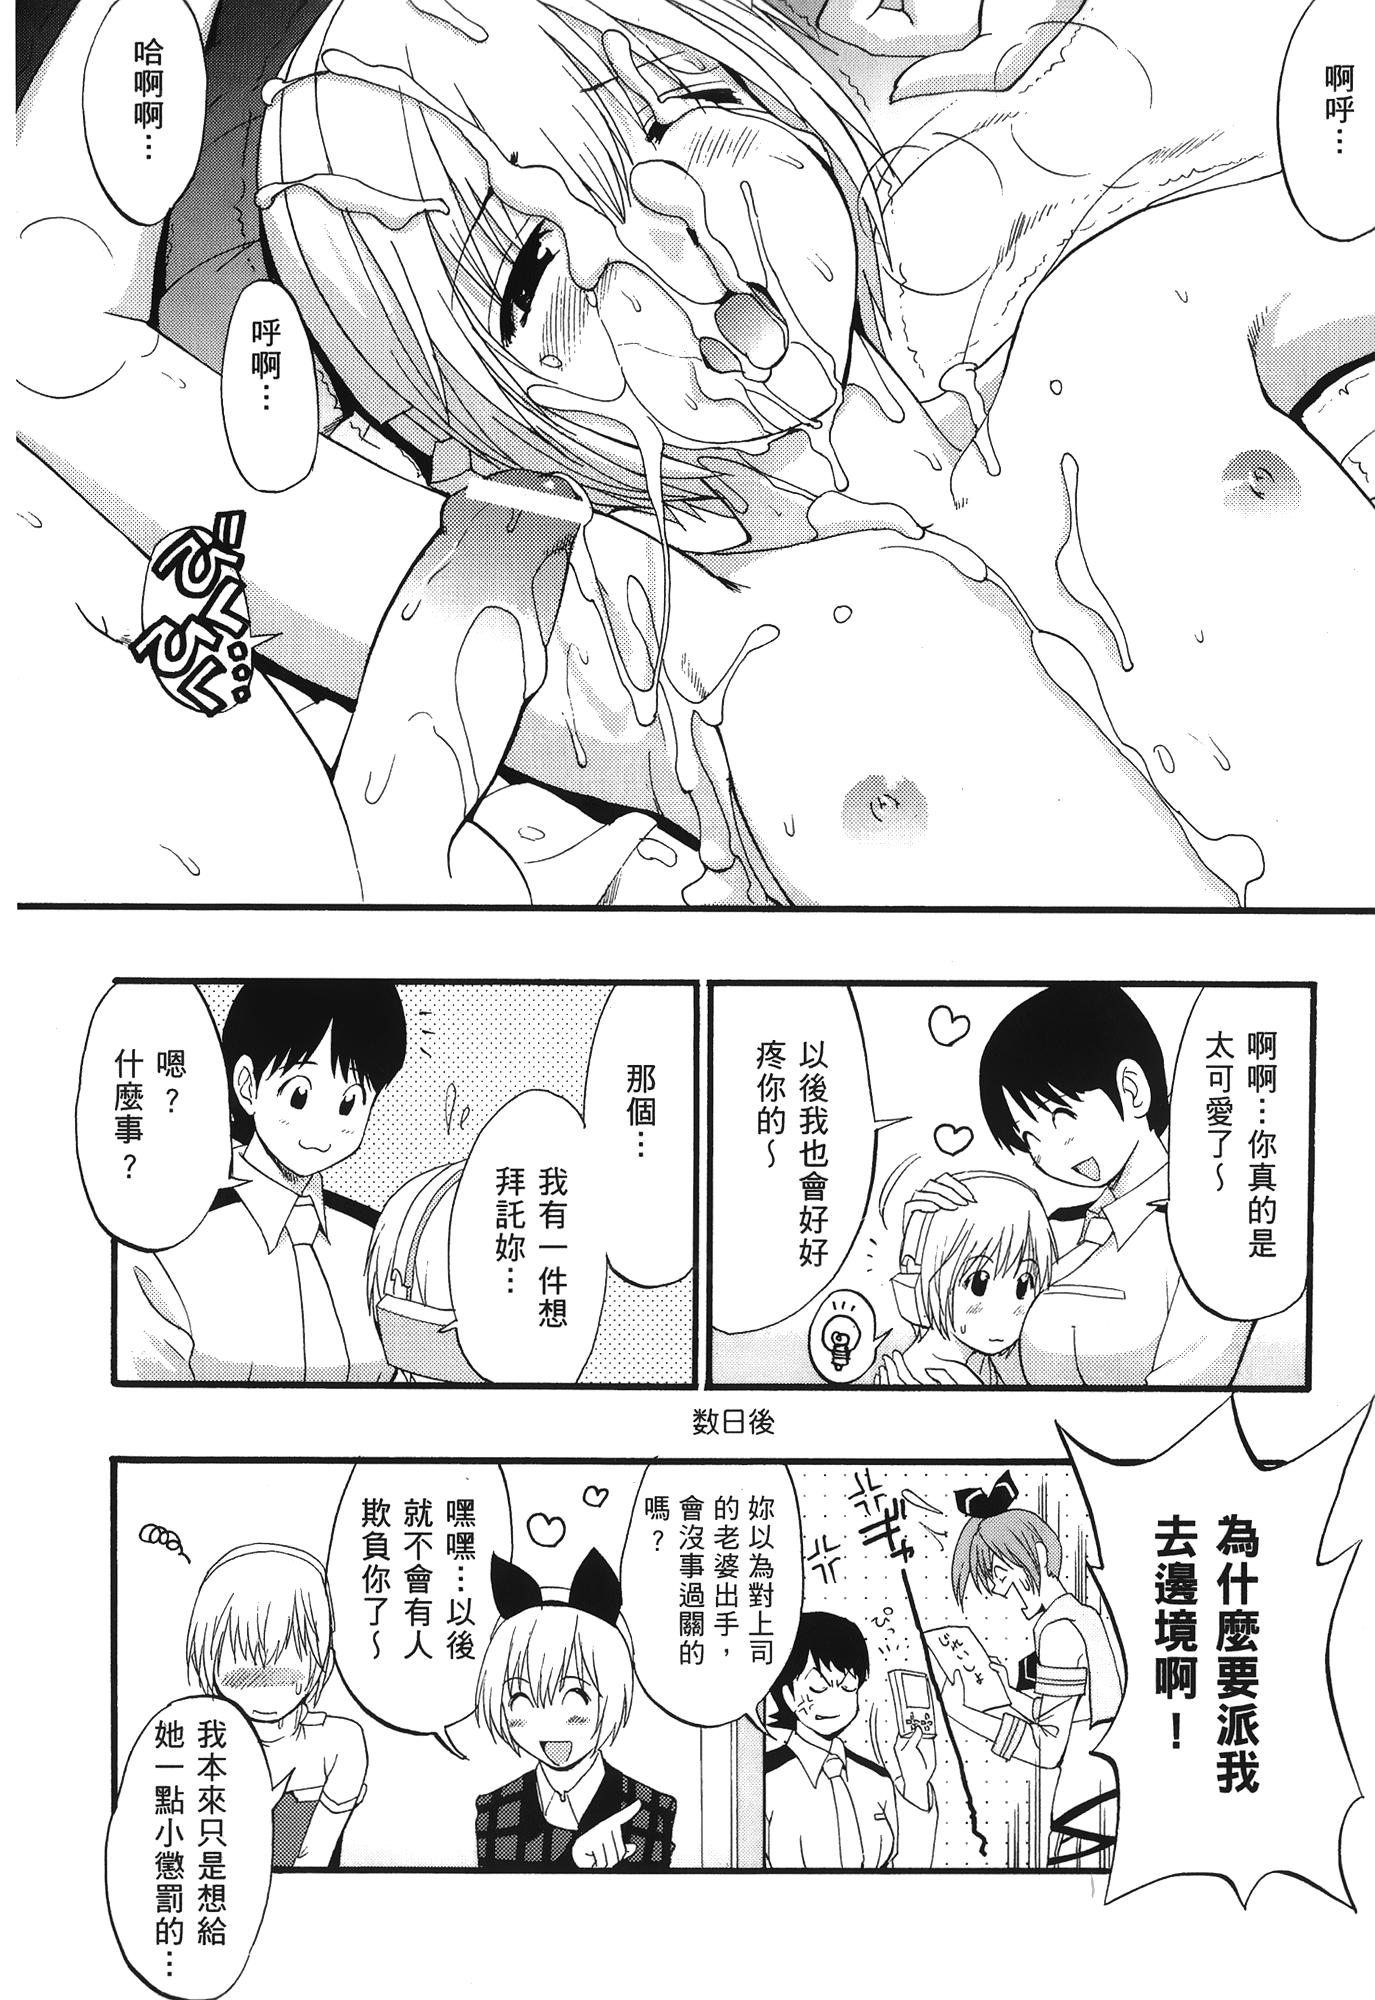 Solo Girl [Saigado] THE YURI & FRIENDS 6 (King of Fighters) | 武鬥美少女 [Chinese] - King of fighters Free Fuck - Page 159